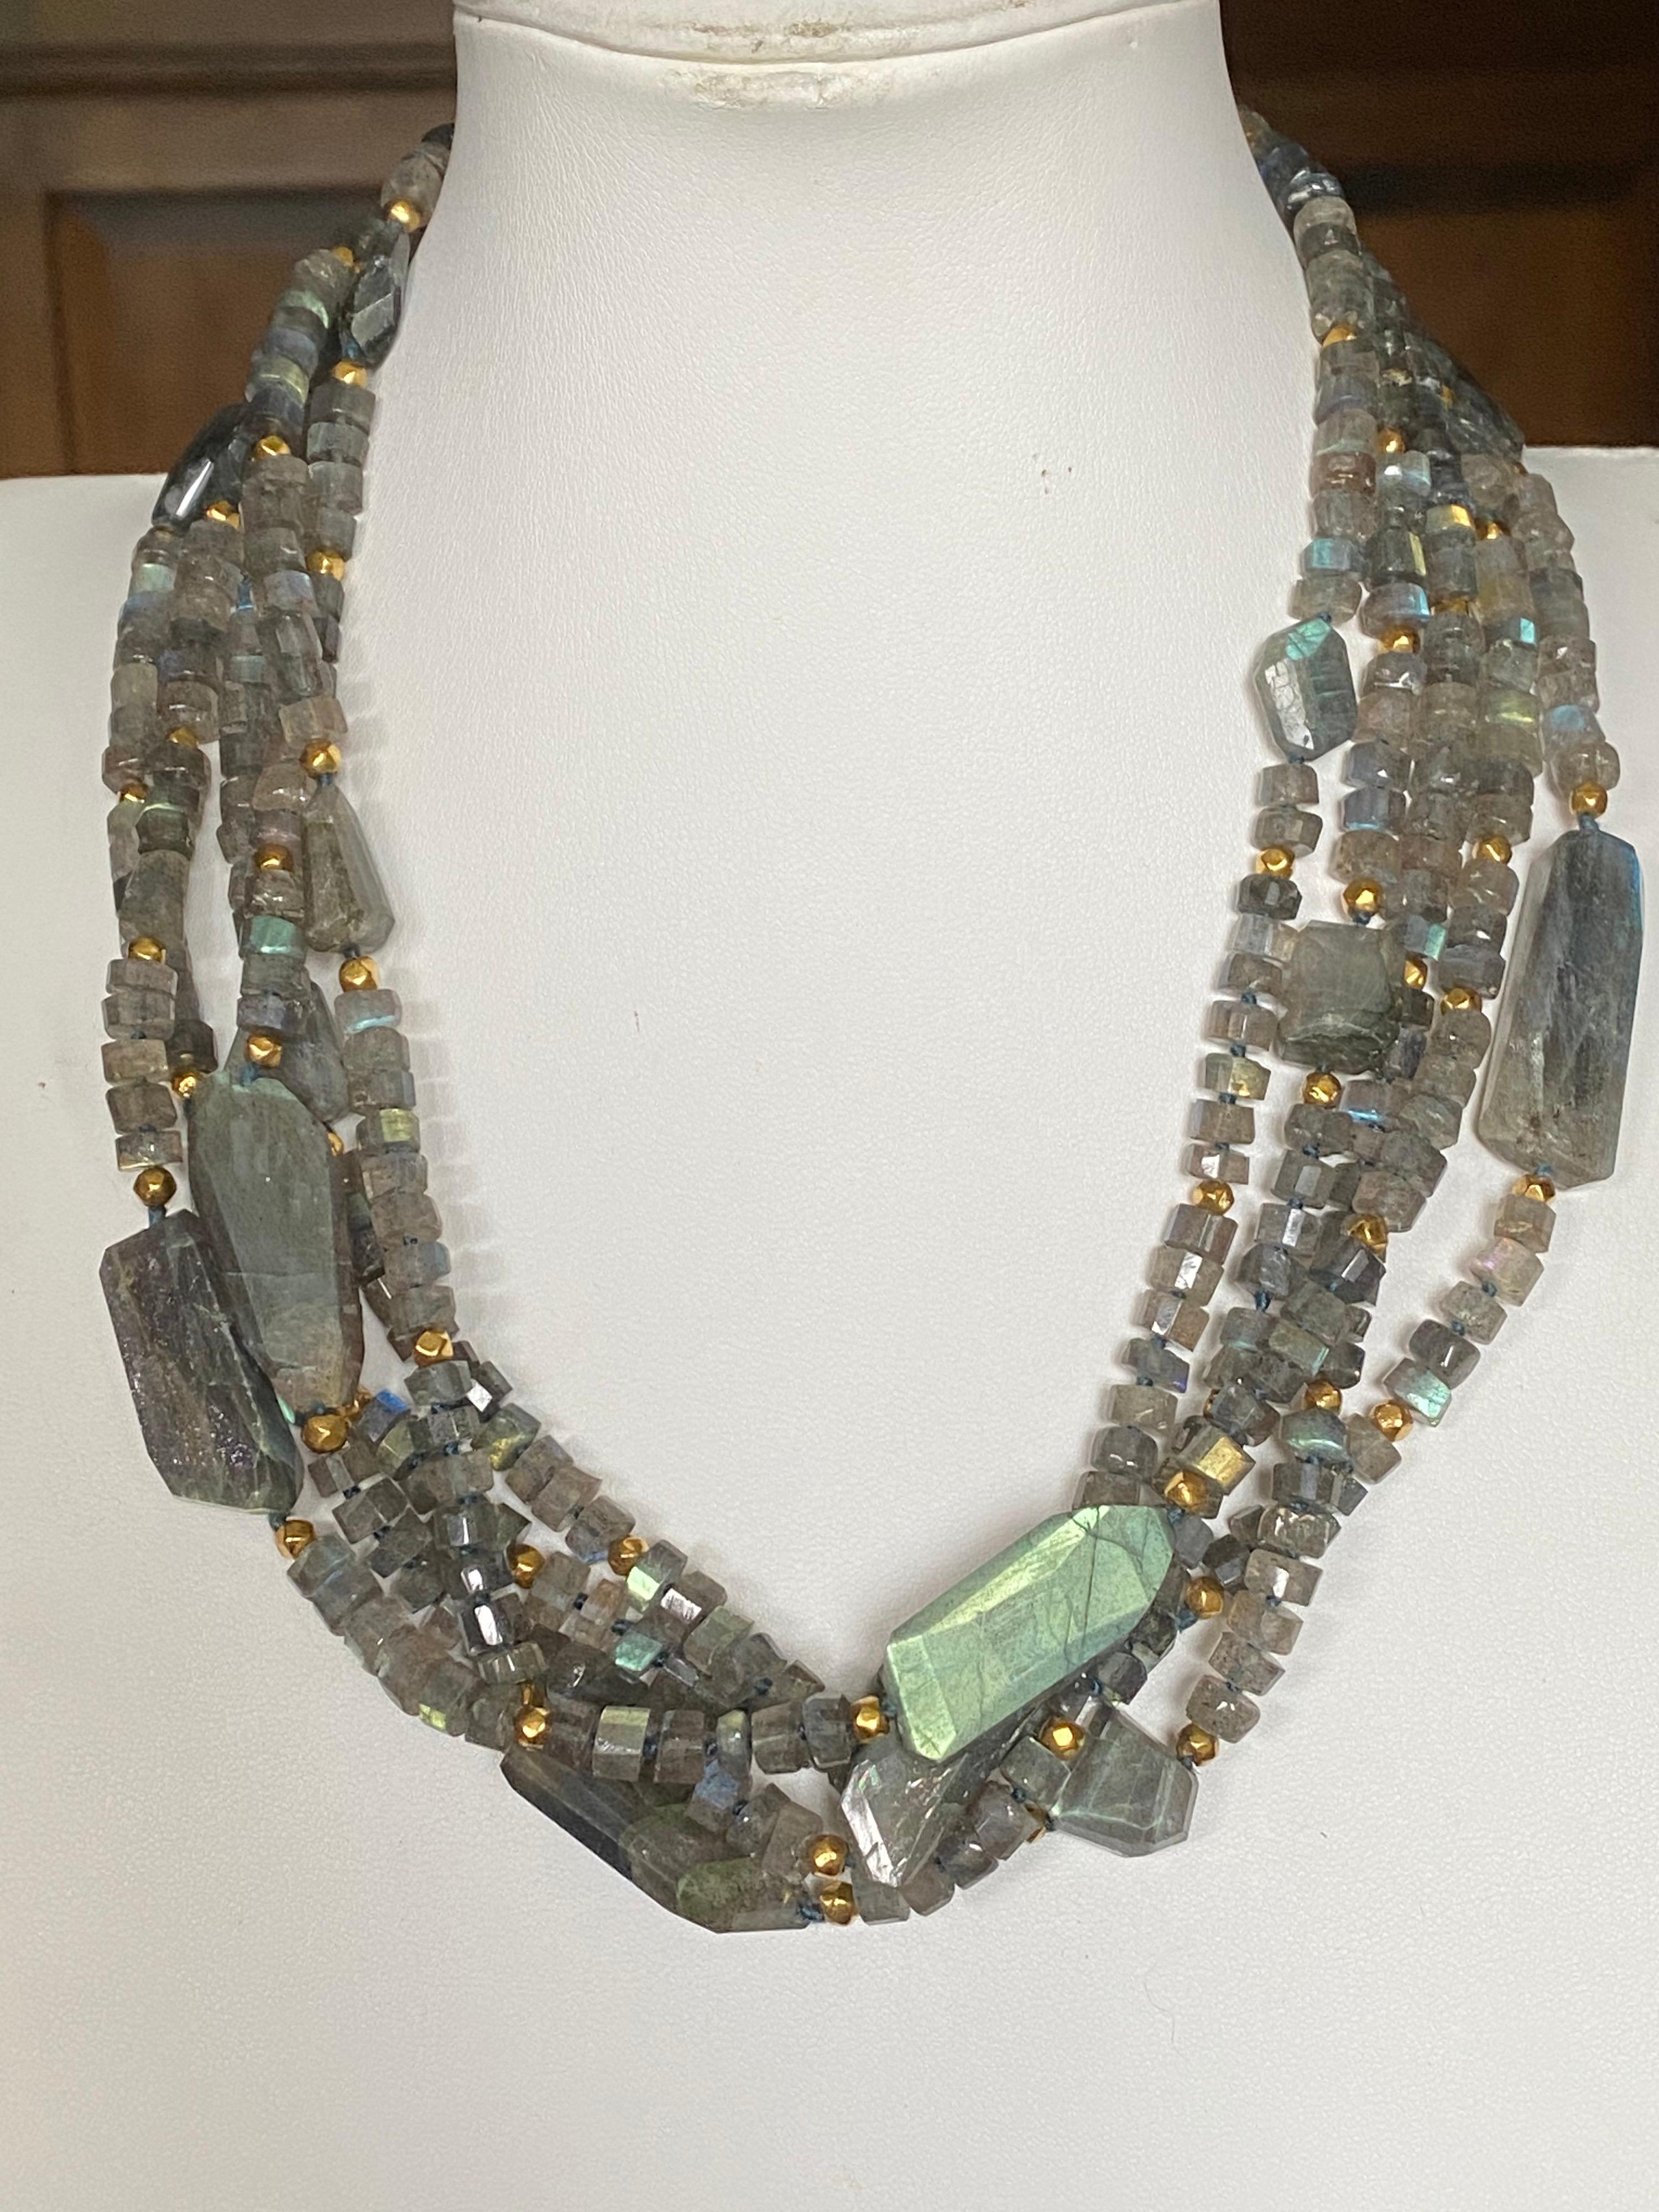 Five strands of beautiful green, blue, yellow, and brown colors in this luscious Labradorite Multi-Strand Necklace. There are gold plated beads and a sterling silver clasp. Measures 18 inches on the neck. Can be wrapped (twisted) or worn as straight